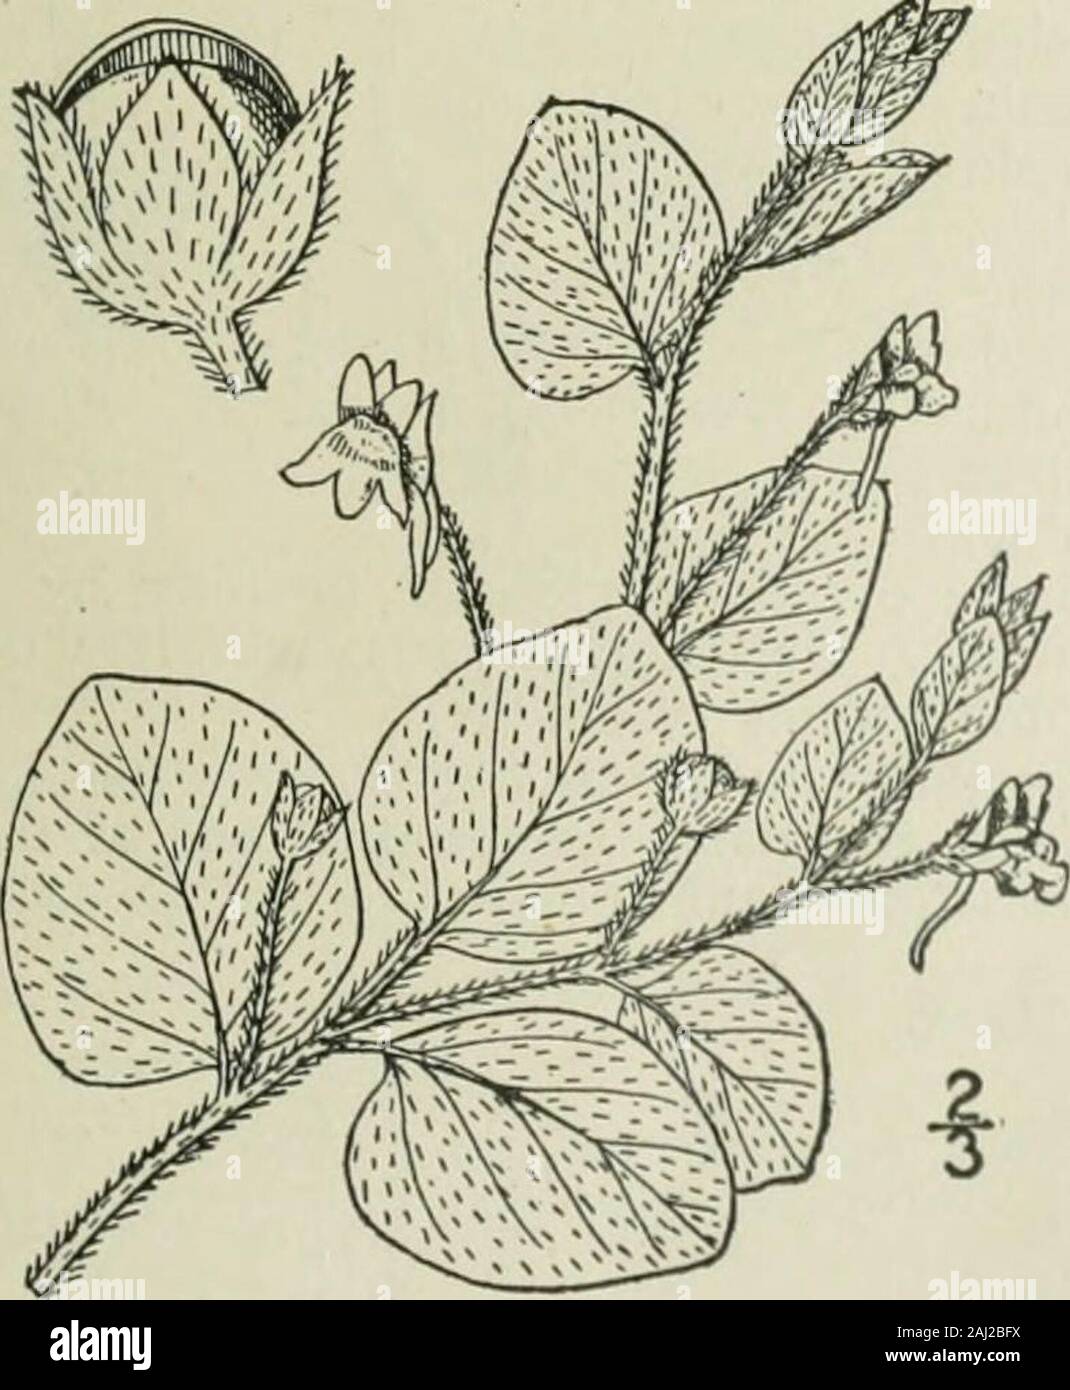 An illustrated flora of the northern United States, Canada and the British possessions : from Newfoundland to the parallel of the southern boundary of Virginia and from the Atlantic Ocean westward to the 102nd meridian . Leaves ovate-orbicular, cordate or rounded at the baseLeaves hastate. 1. K. spuria. 2. K. Elatine. I. Kickxia spuria (L.) Dumort. Round-leaved Toad-Flax. Fig. 3740.. Antirrhinum spuriuni L. Sp. PI. 613. 1753.Linaria spuria Mill. Gard. Diet. Ed. 8, no. 15. 1768.Kickxia spuria Dumont. Fl. Belg. 35. 1827.Elatinoides spuria Wettst. in Engl. & Prantl, Nat. Pfl.Fam. 4: Abt. 3b, 58. Stock Photo